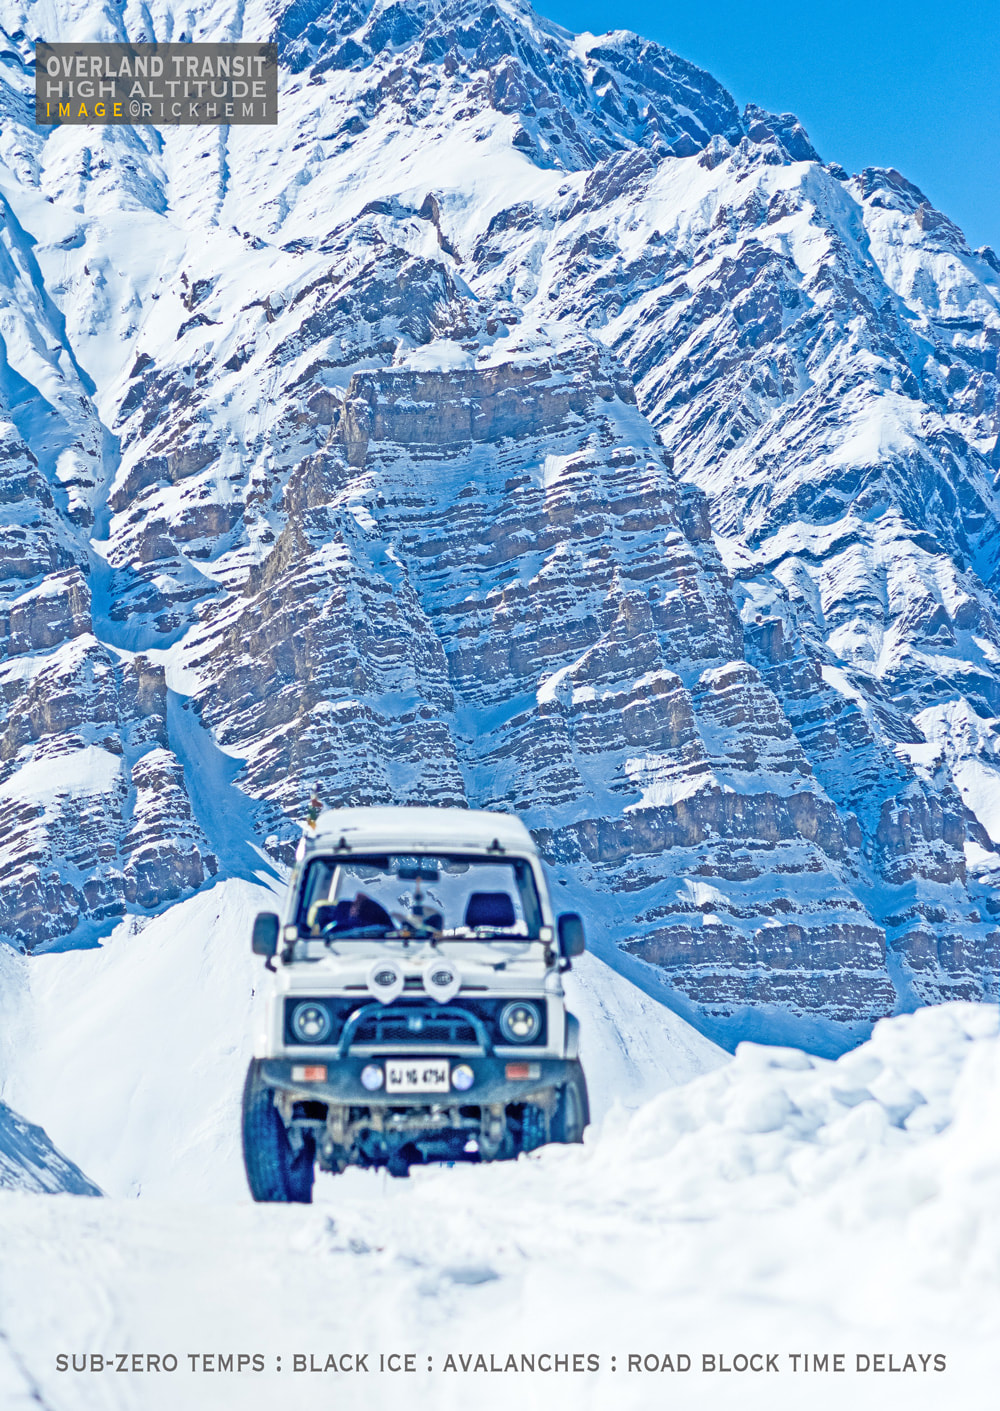 solo overland travel self-driving above 3500 metres, midwinter extreme sub-zero conditions, Himalaya, Andes, image by Rick Hemi